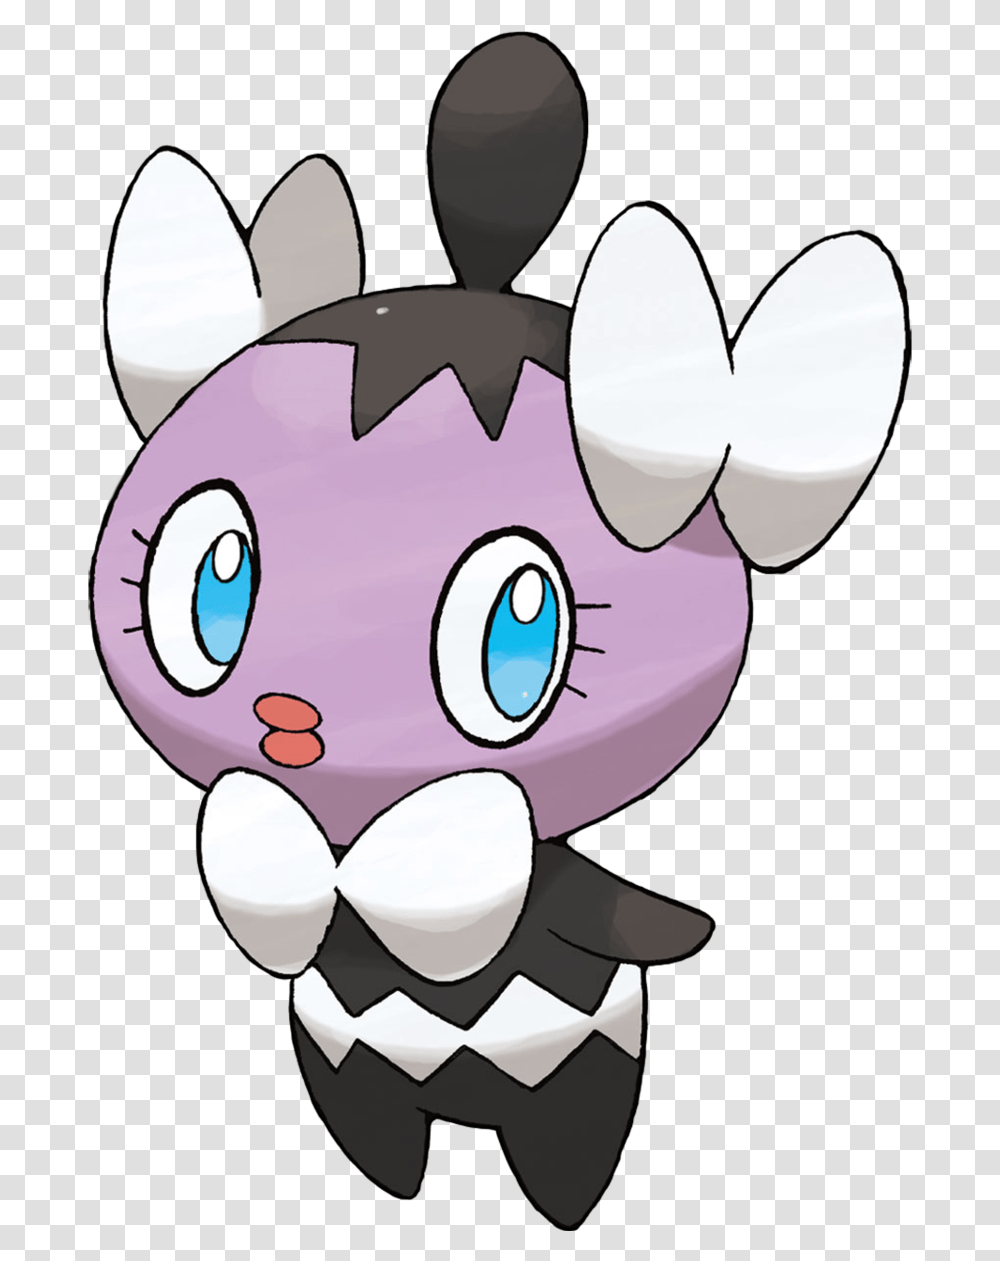 Black White And Pink Pokemon, Head, Piggy Bank Transparent Png